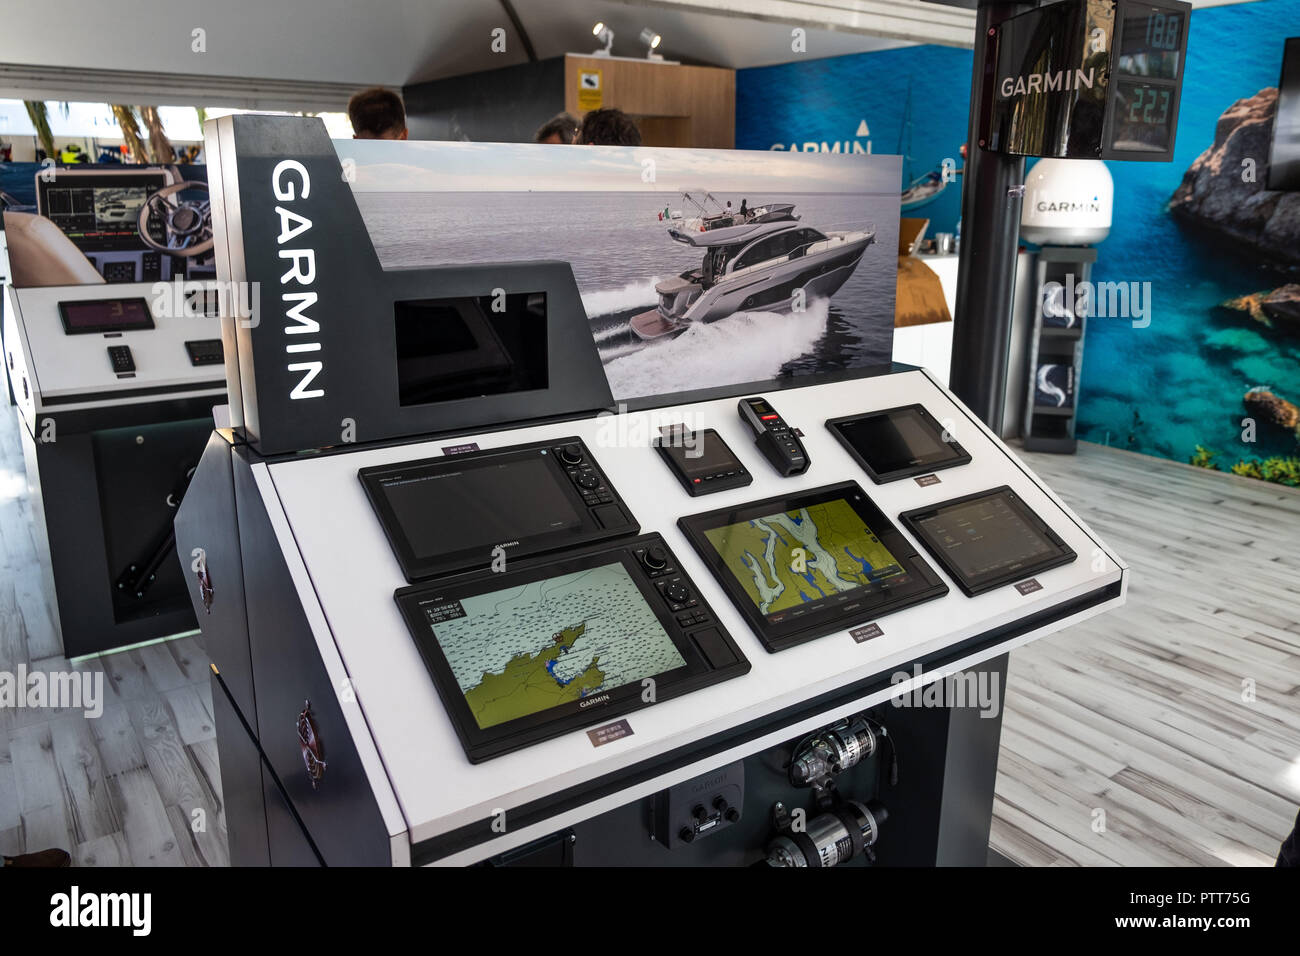 Barcelona, Catalonia, Spain. 10th Oct, 2018. New marine navigation systems  of the Garmin brands are seen during the boat show.The 57th Barcelona  International Boat Show opens its doors, with more than 700